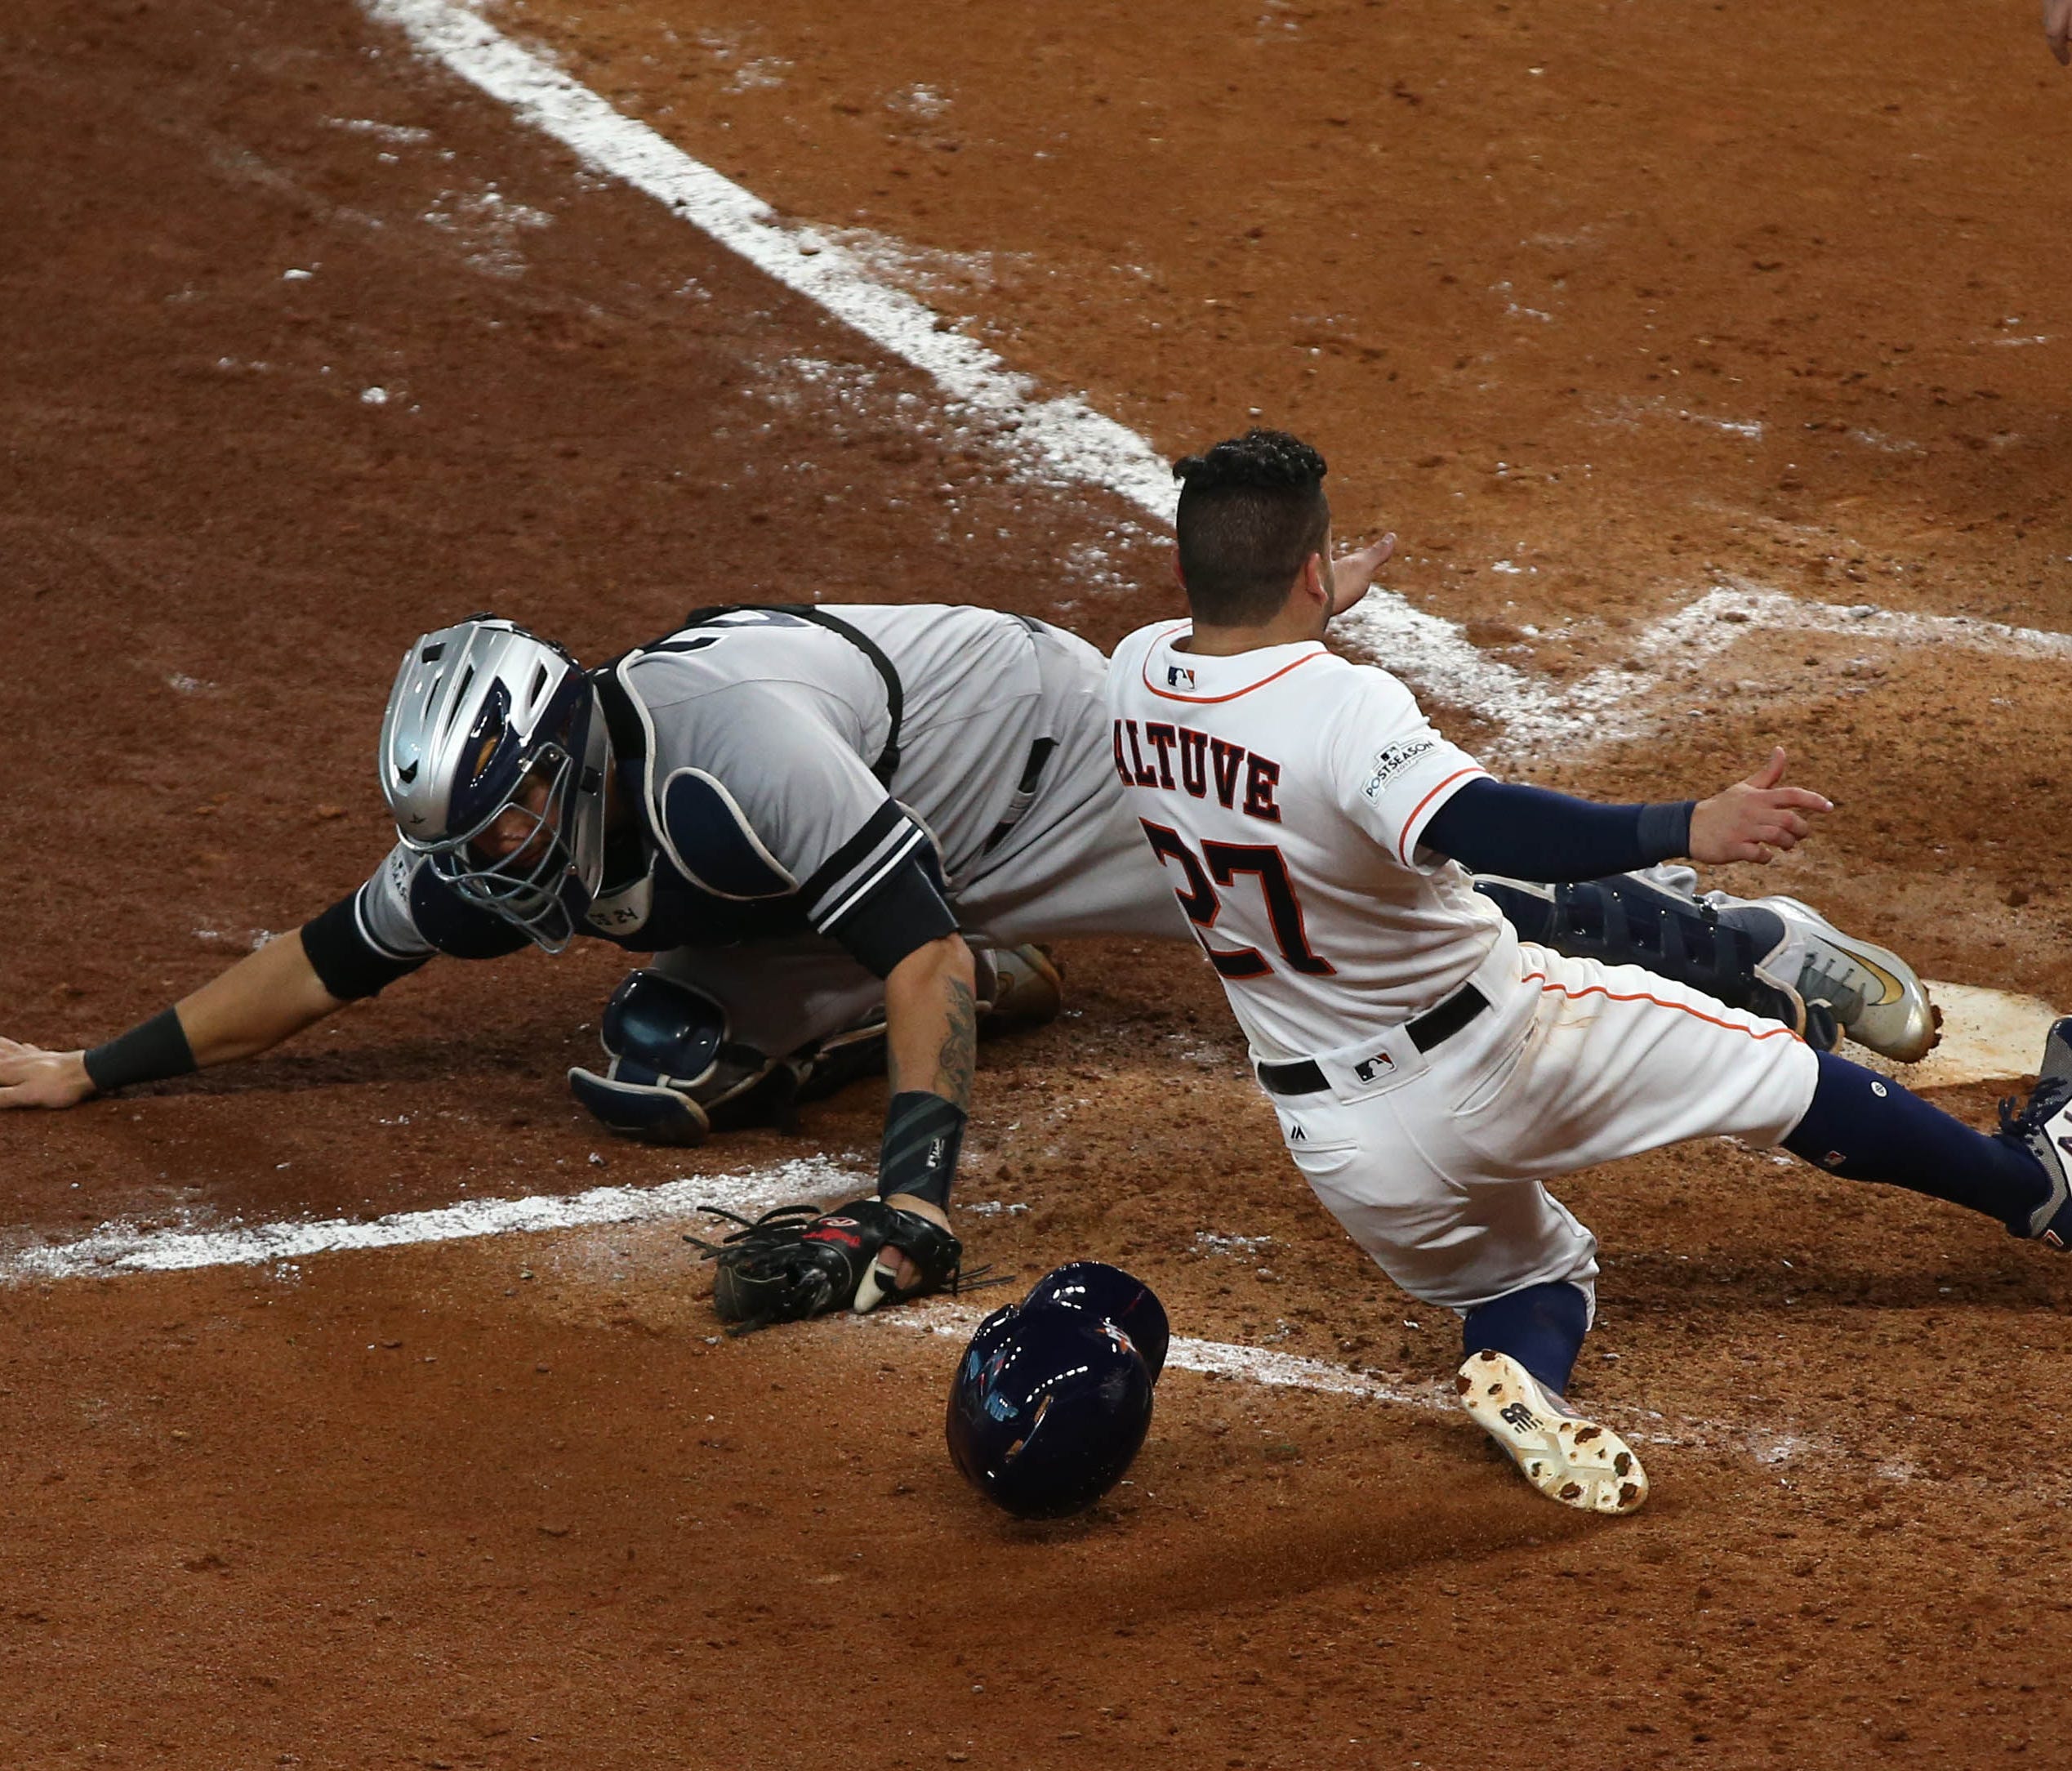 Oct 14, 2017; Houston, TX, USA; Houston Astros second baseman Jose Altuve (27) crosses home plate for the winning run as New York Yankees catcher Gary Sanchez (24) reaches for the ball during the ninth inning in game two of the 2017 ALCS playoff base